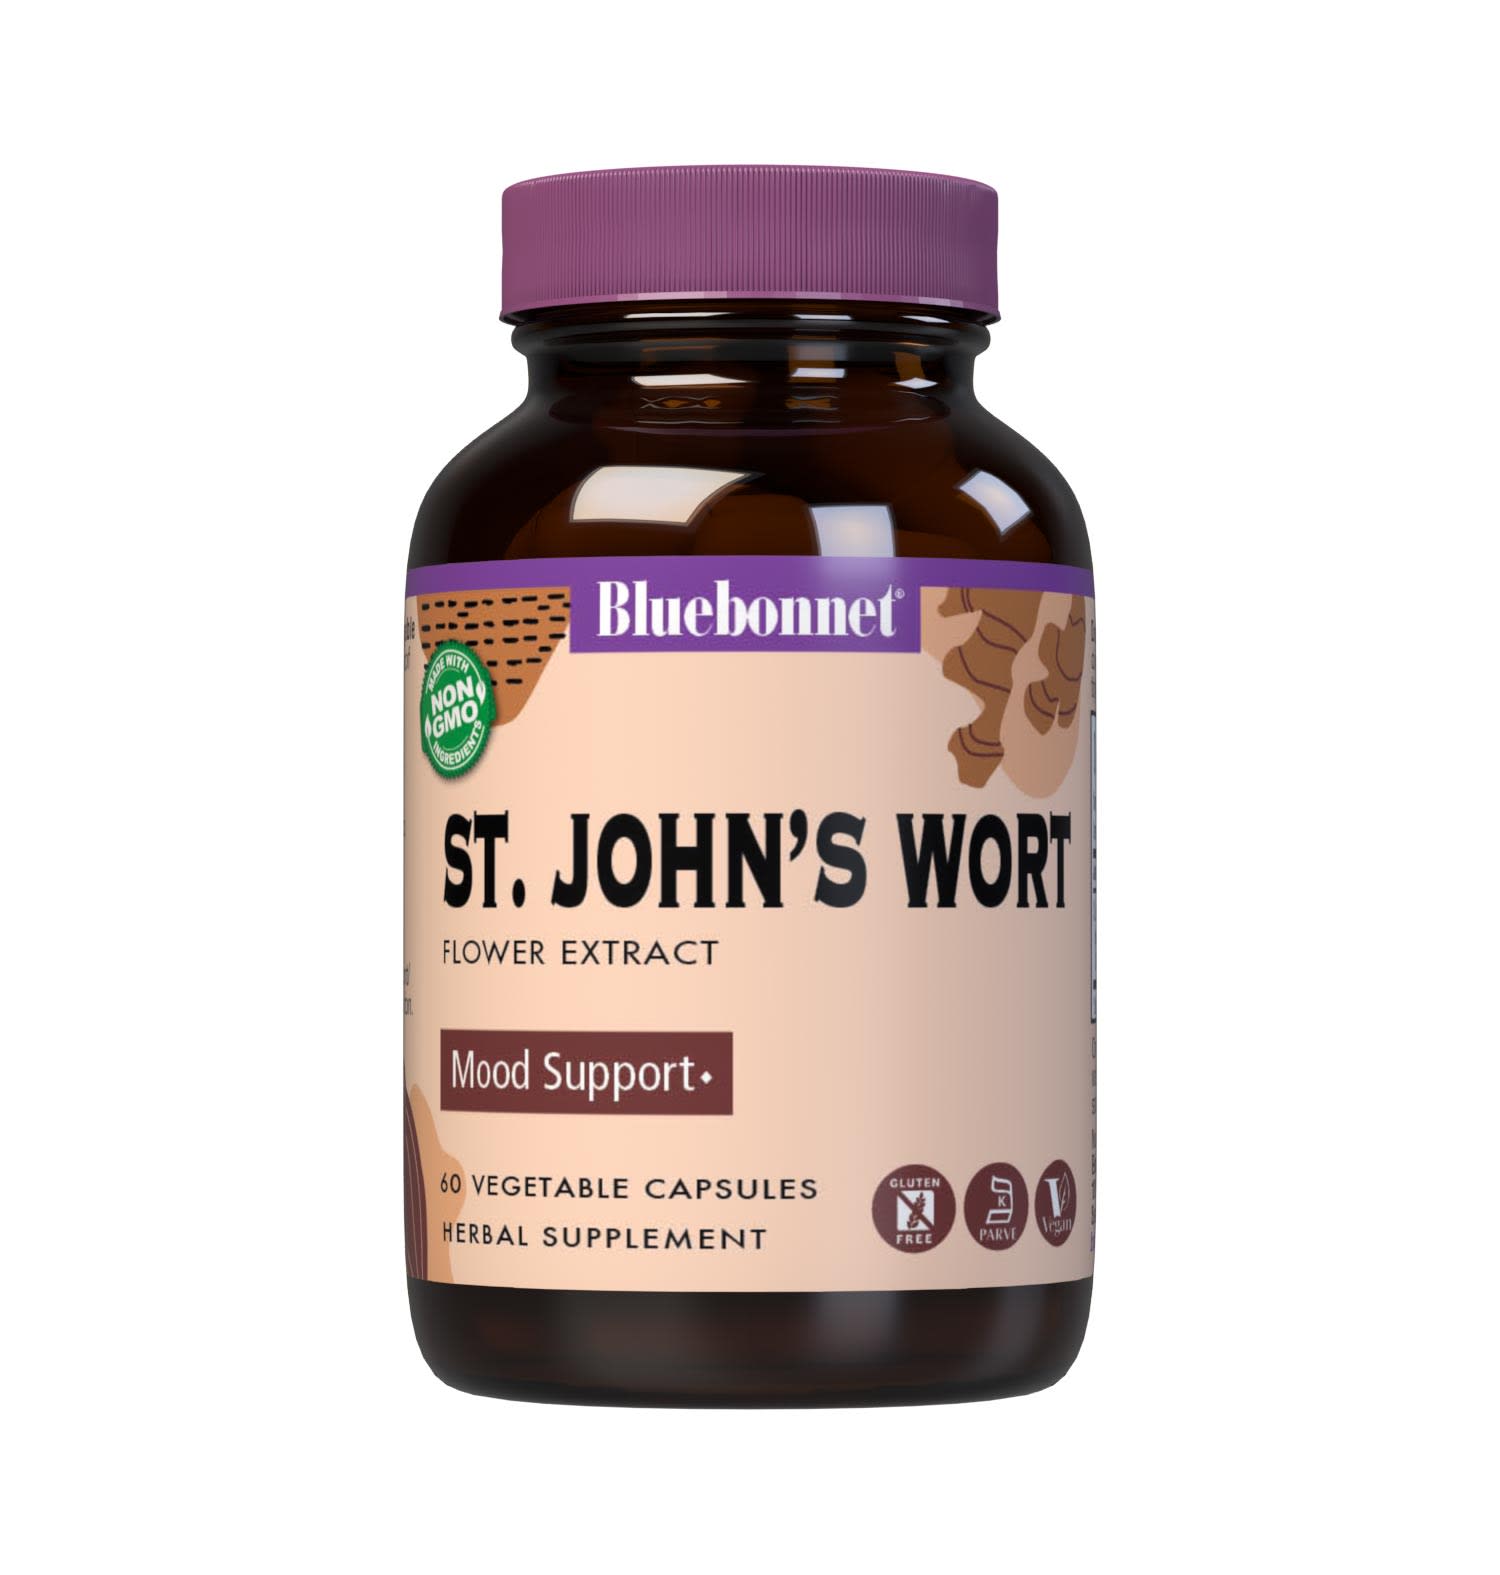 Bluebonnet’s St. John’s Wort Flower Extract 60 Vegetable Capsules provide a standardized extract of hypericin, the most researched active constituent found in St. John’s Wort. A clean and gentle water-based extraction method is employed to capture and preserve St. John’s Wort’s most valuable components. #size_60 count